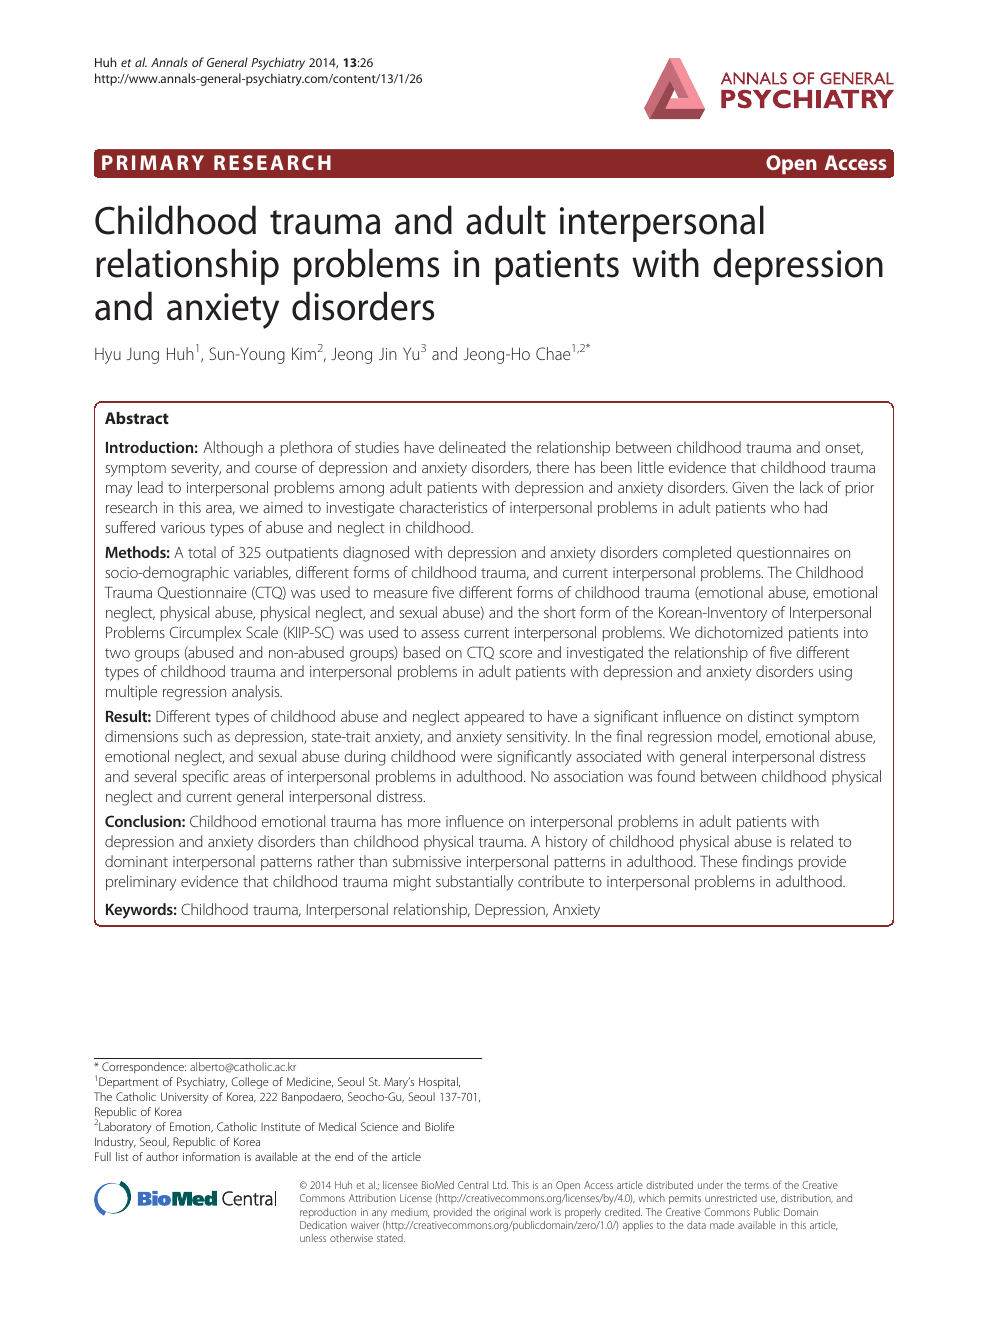 Childhood Trauma And Adult Interpersonal Relationship Problems In Patients With Depression And Anxiety Disorders Topic Of Research Paper In Clinical Medicine Download Scholarly Article Pdf And Read For Free On Cyberleninka